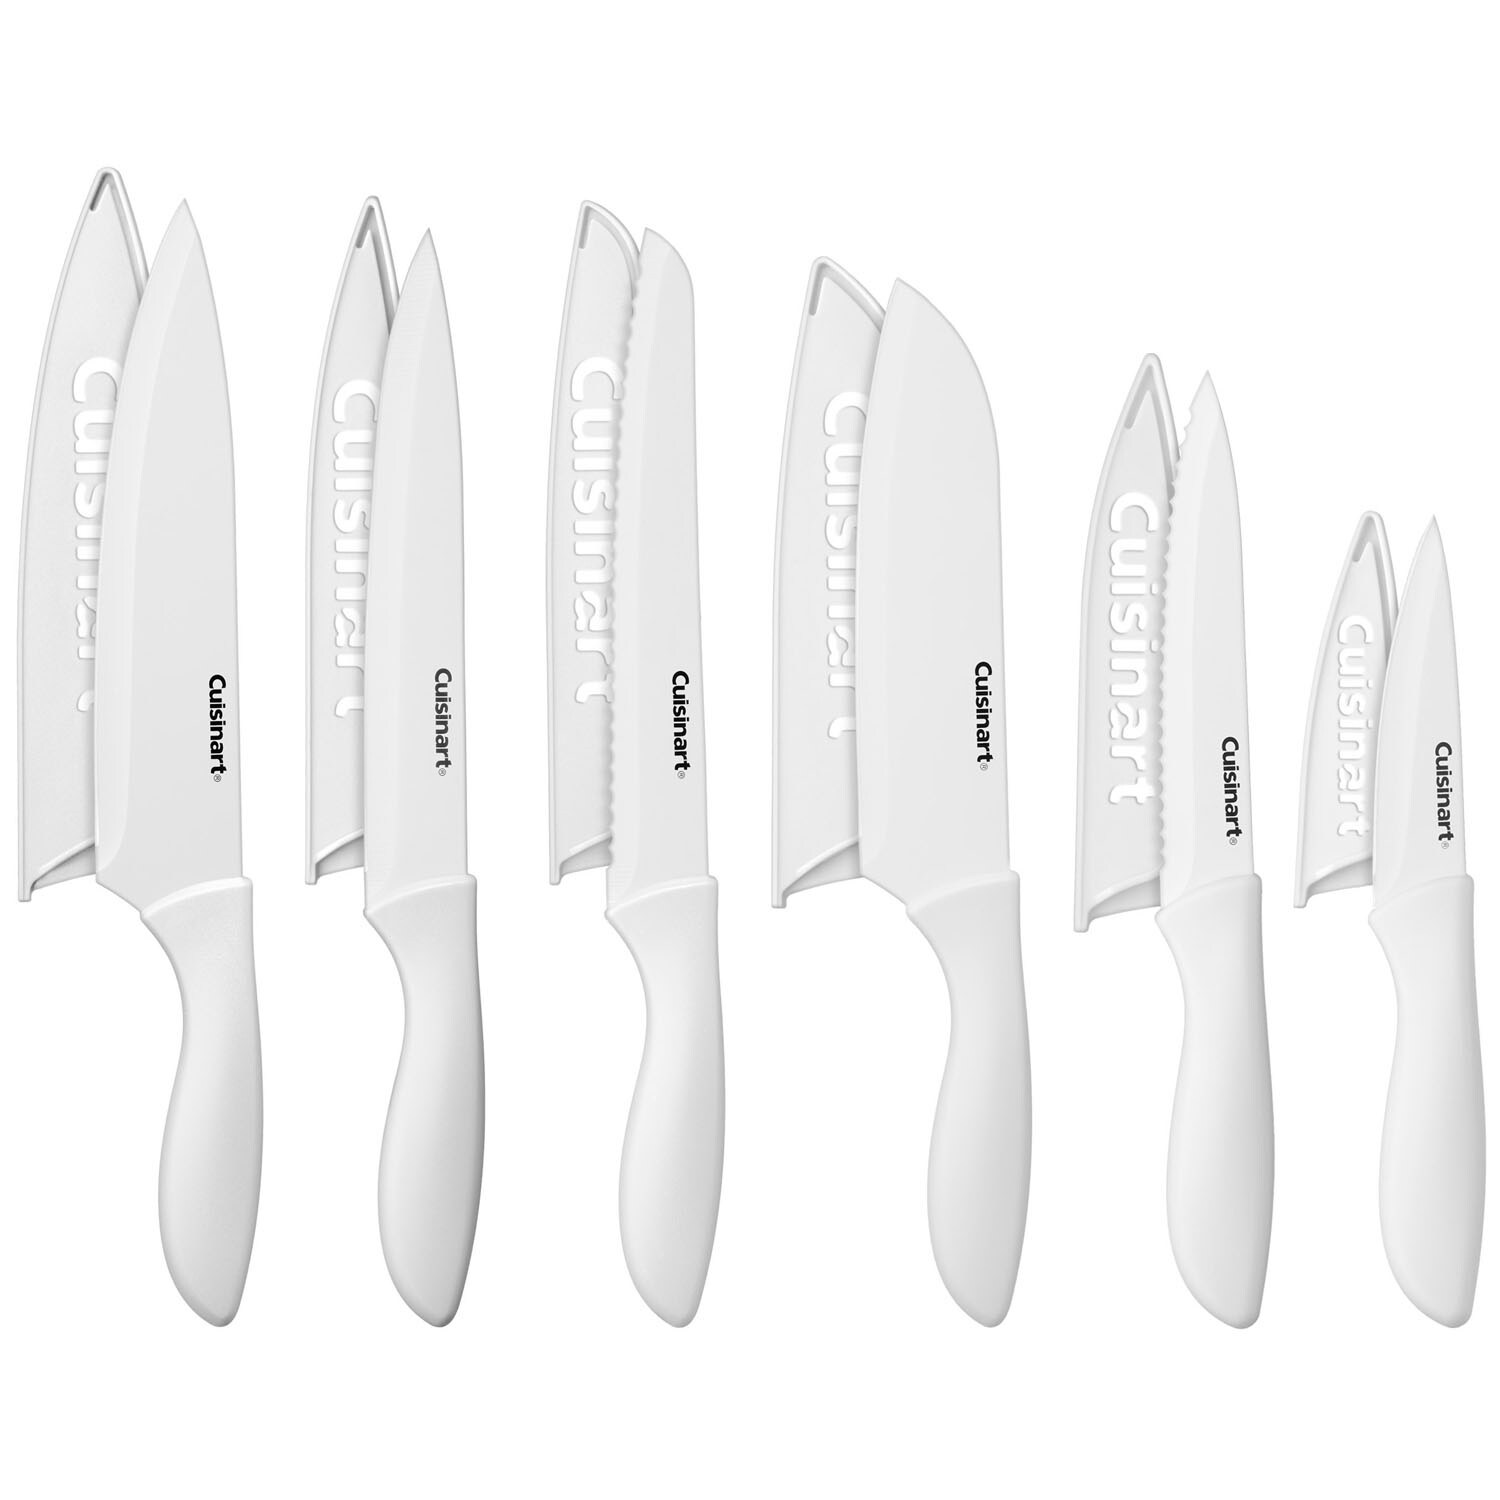 https://ak1.ostkcdn.com/images/products/is/images/direct/9d0aa95111375bb1f5ff3d9590518c273a8d1bd0/Cuisinart-Advantage-12-Piece-Knife-Set-and-Guards-Bundle-with-Magnetic-Knife-Mount.jpg